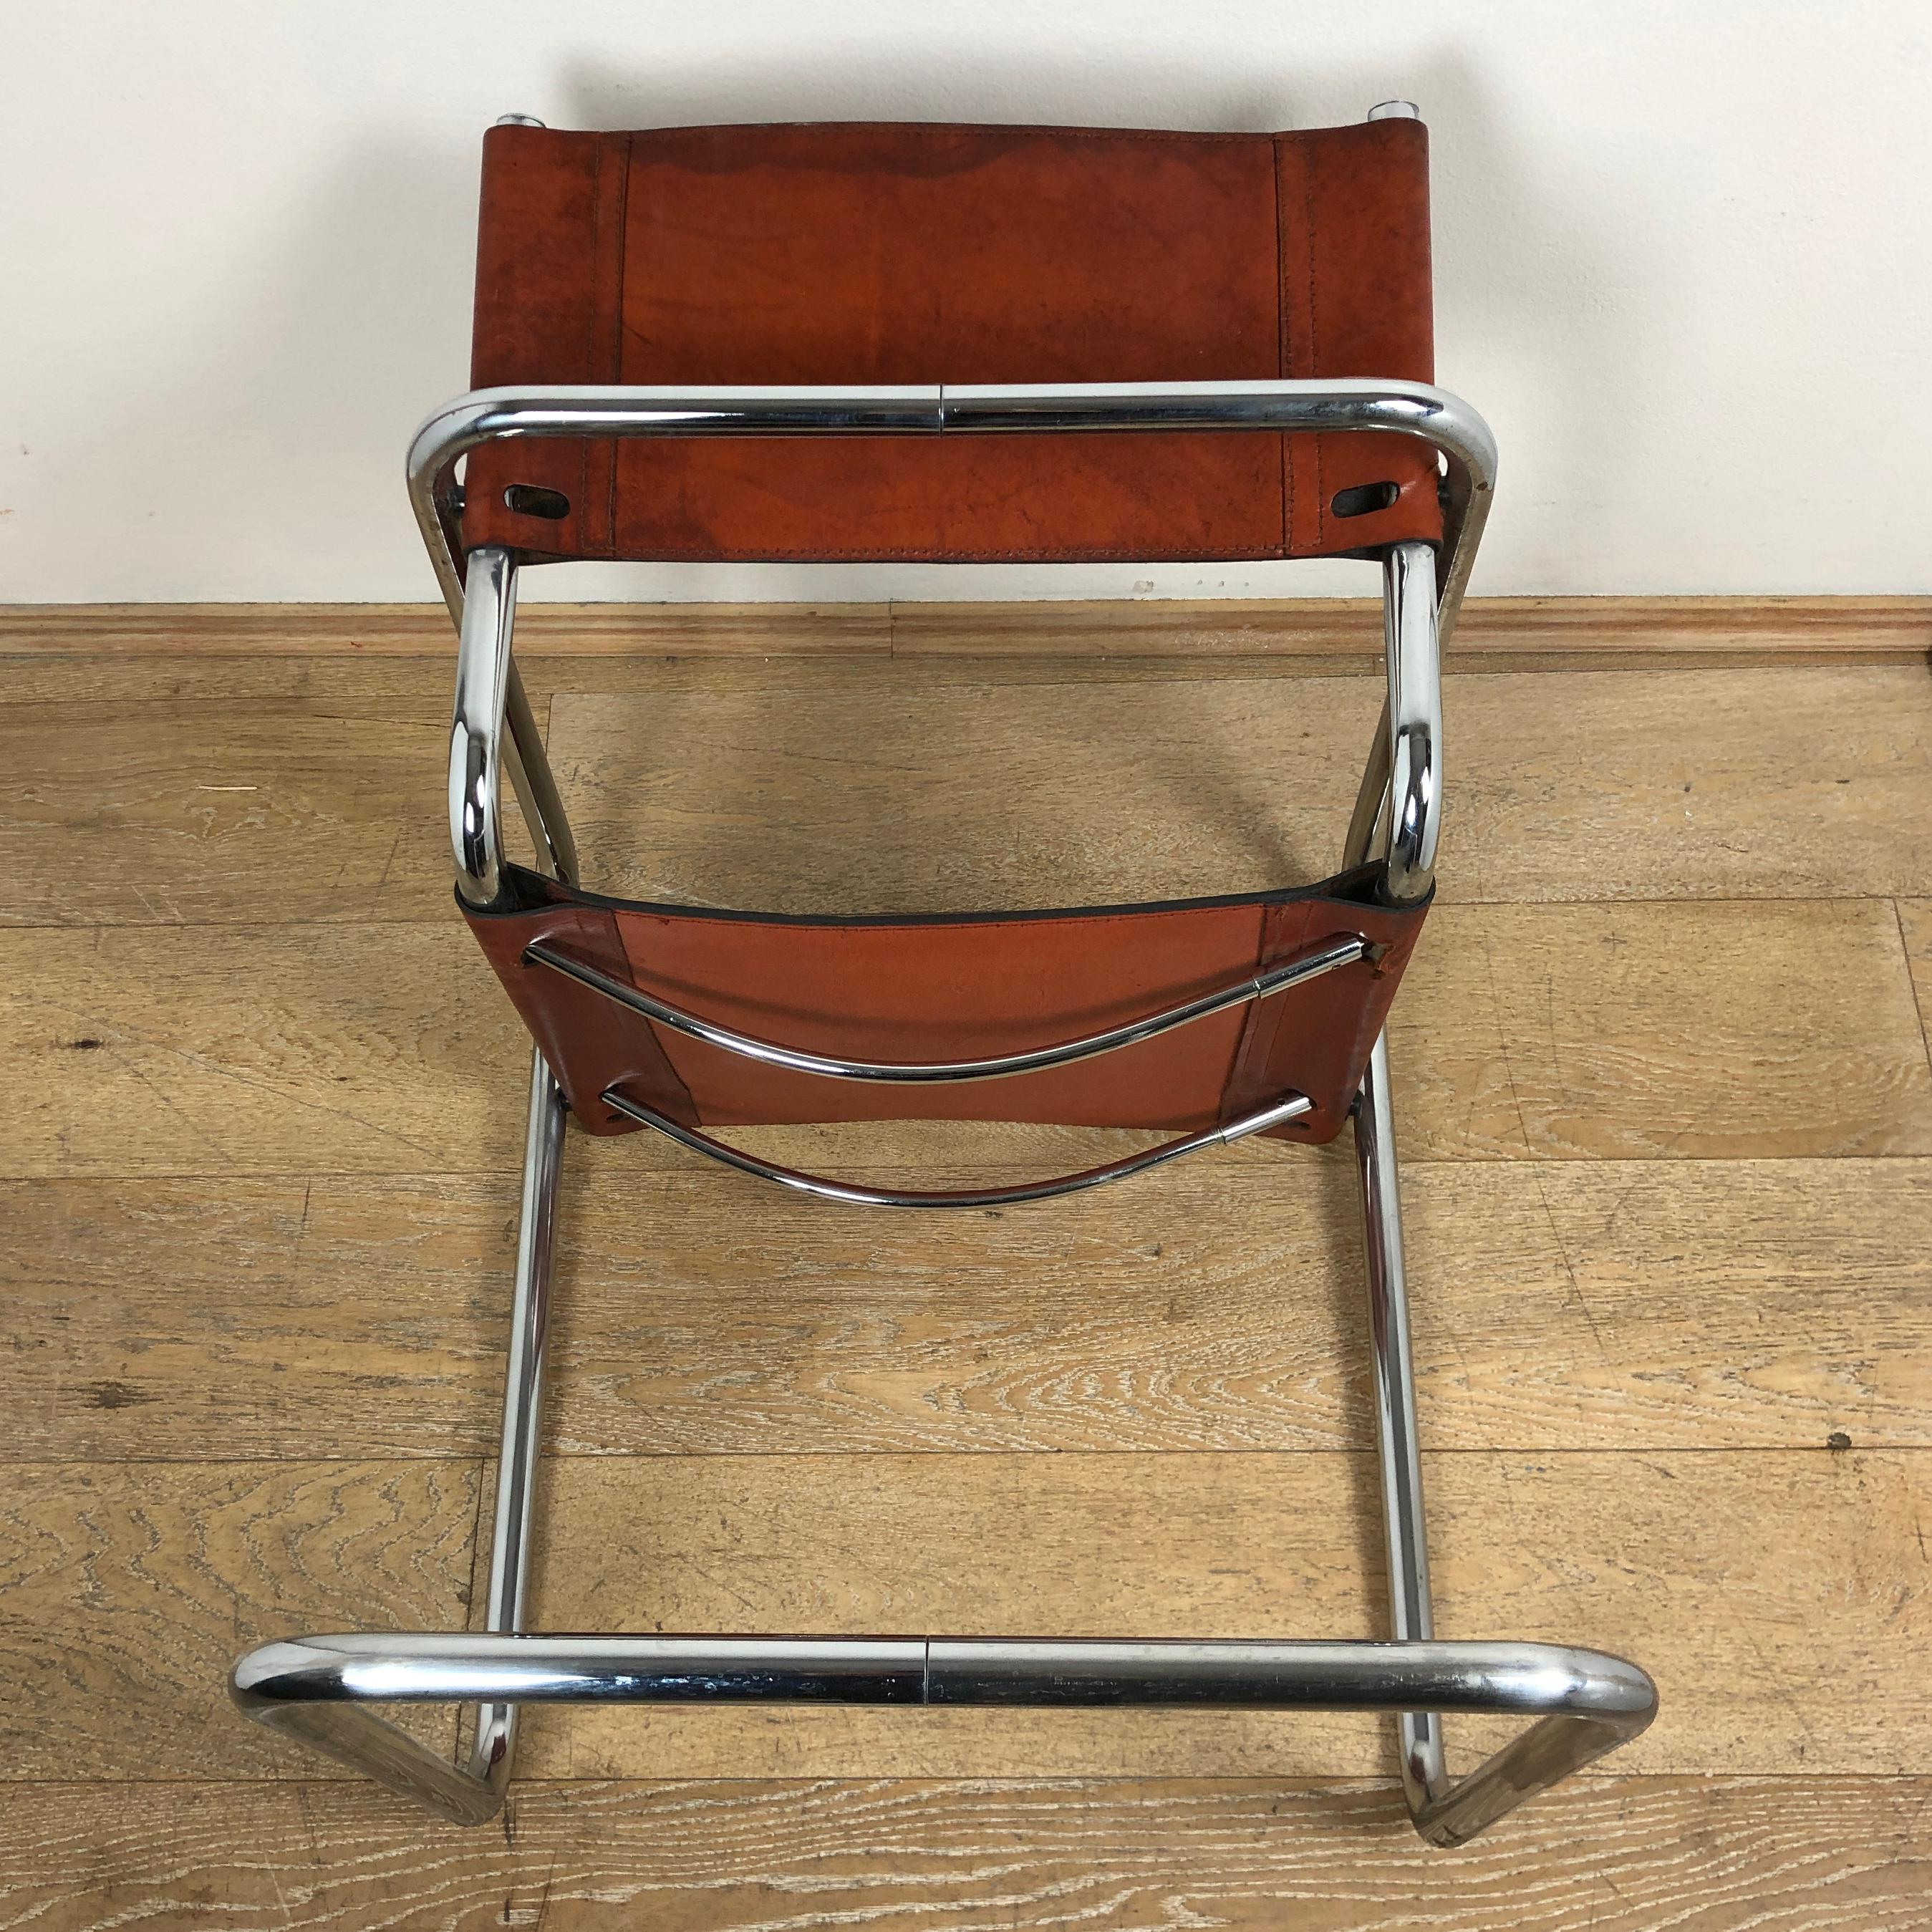 Late 20th Century Brown Leather Chrome-Plated Tubular Steel Cantilever Chair Mart Stam Style